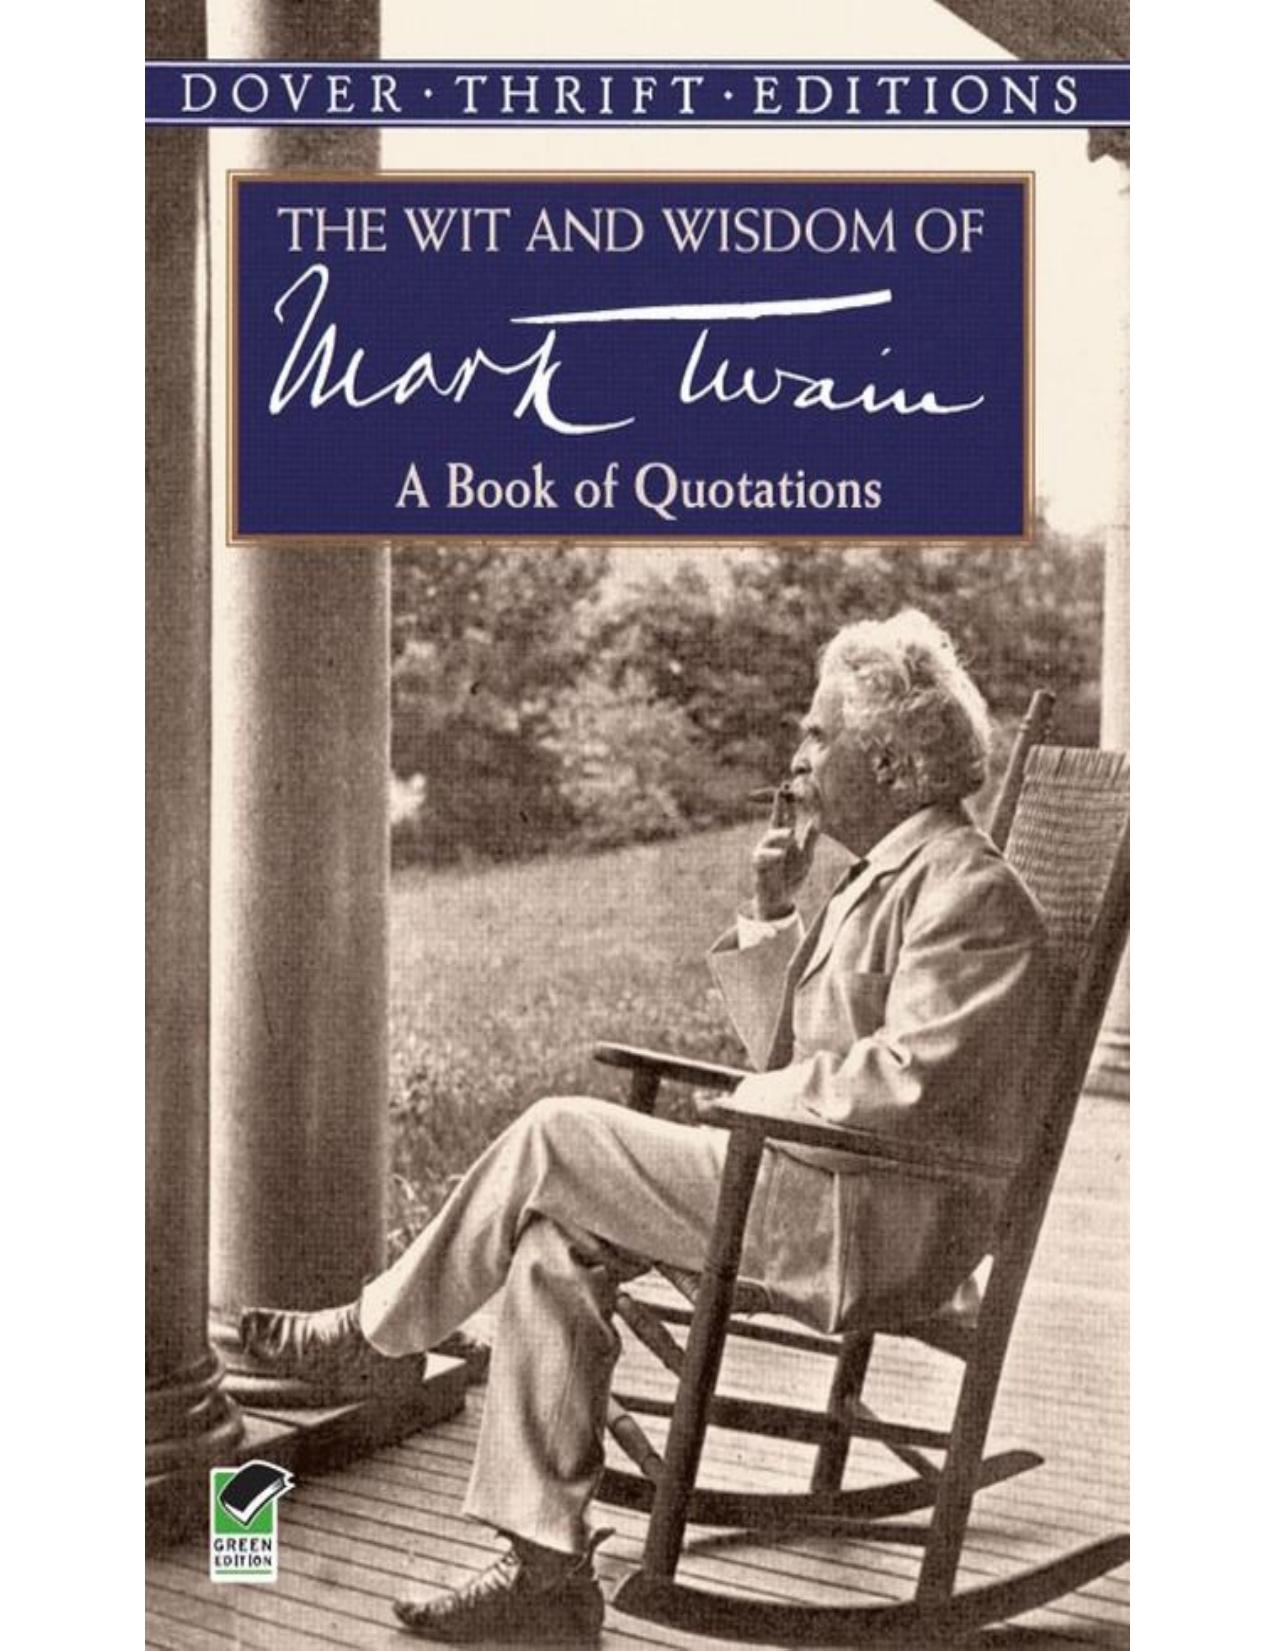 The Wit and Wisdom of Mark Twain: A Book of Quotations (Dover Thrift Editions) by Twain Mark